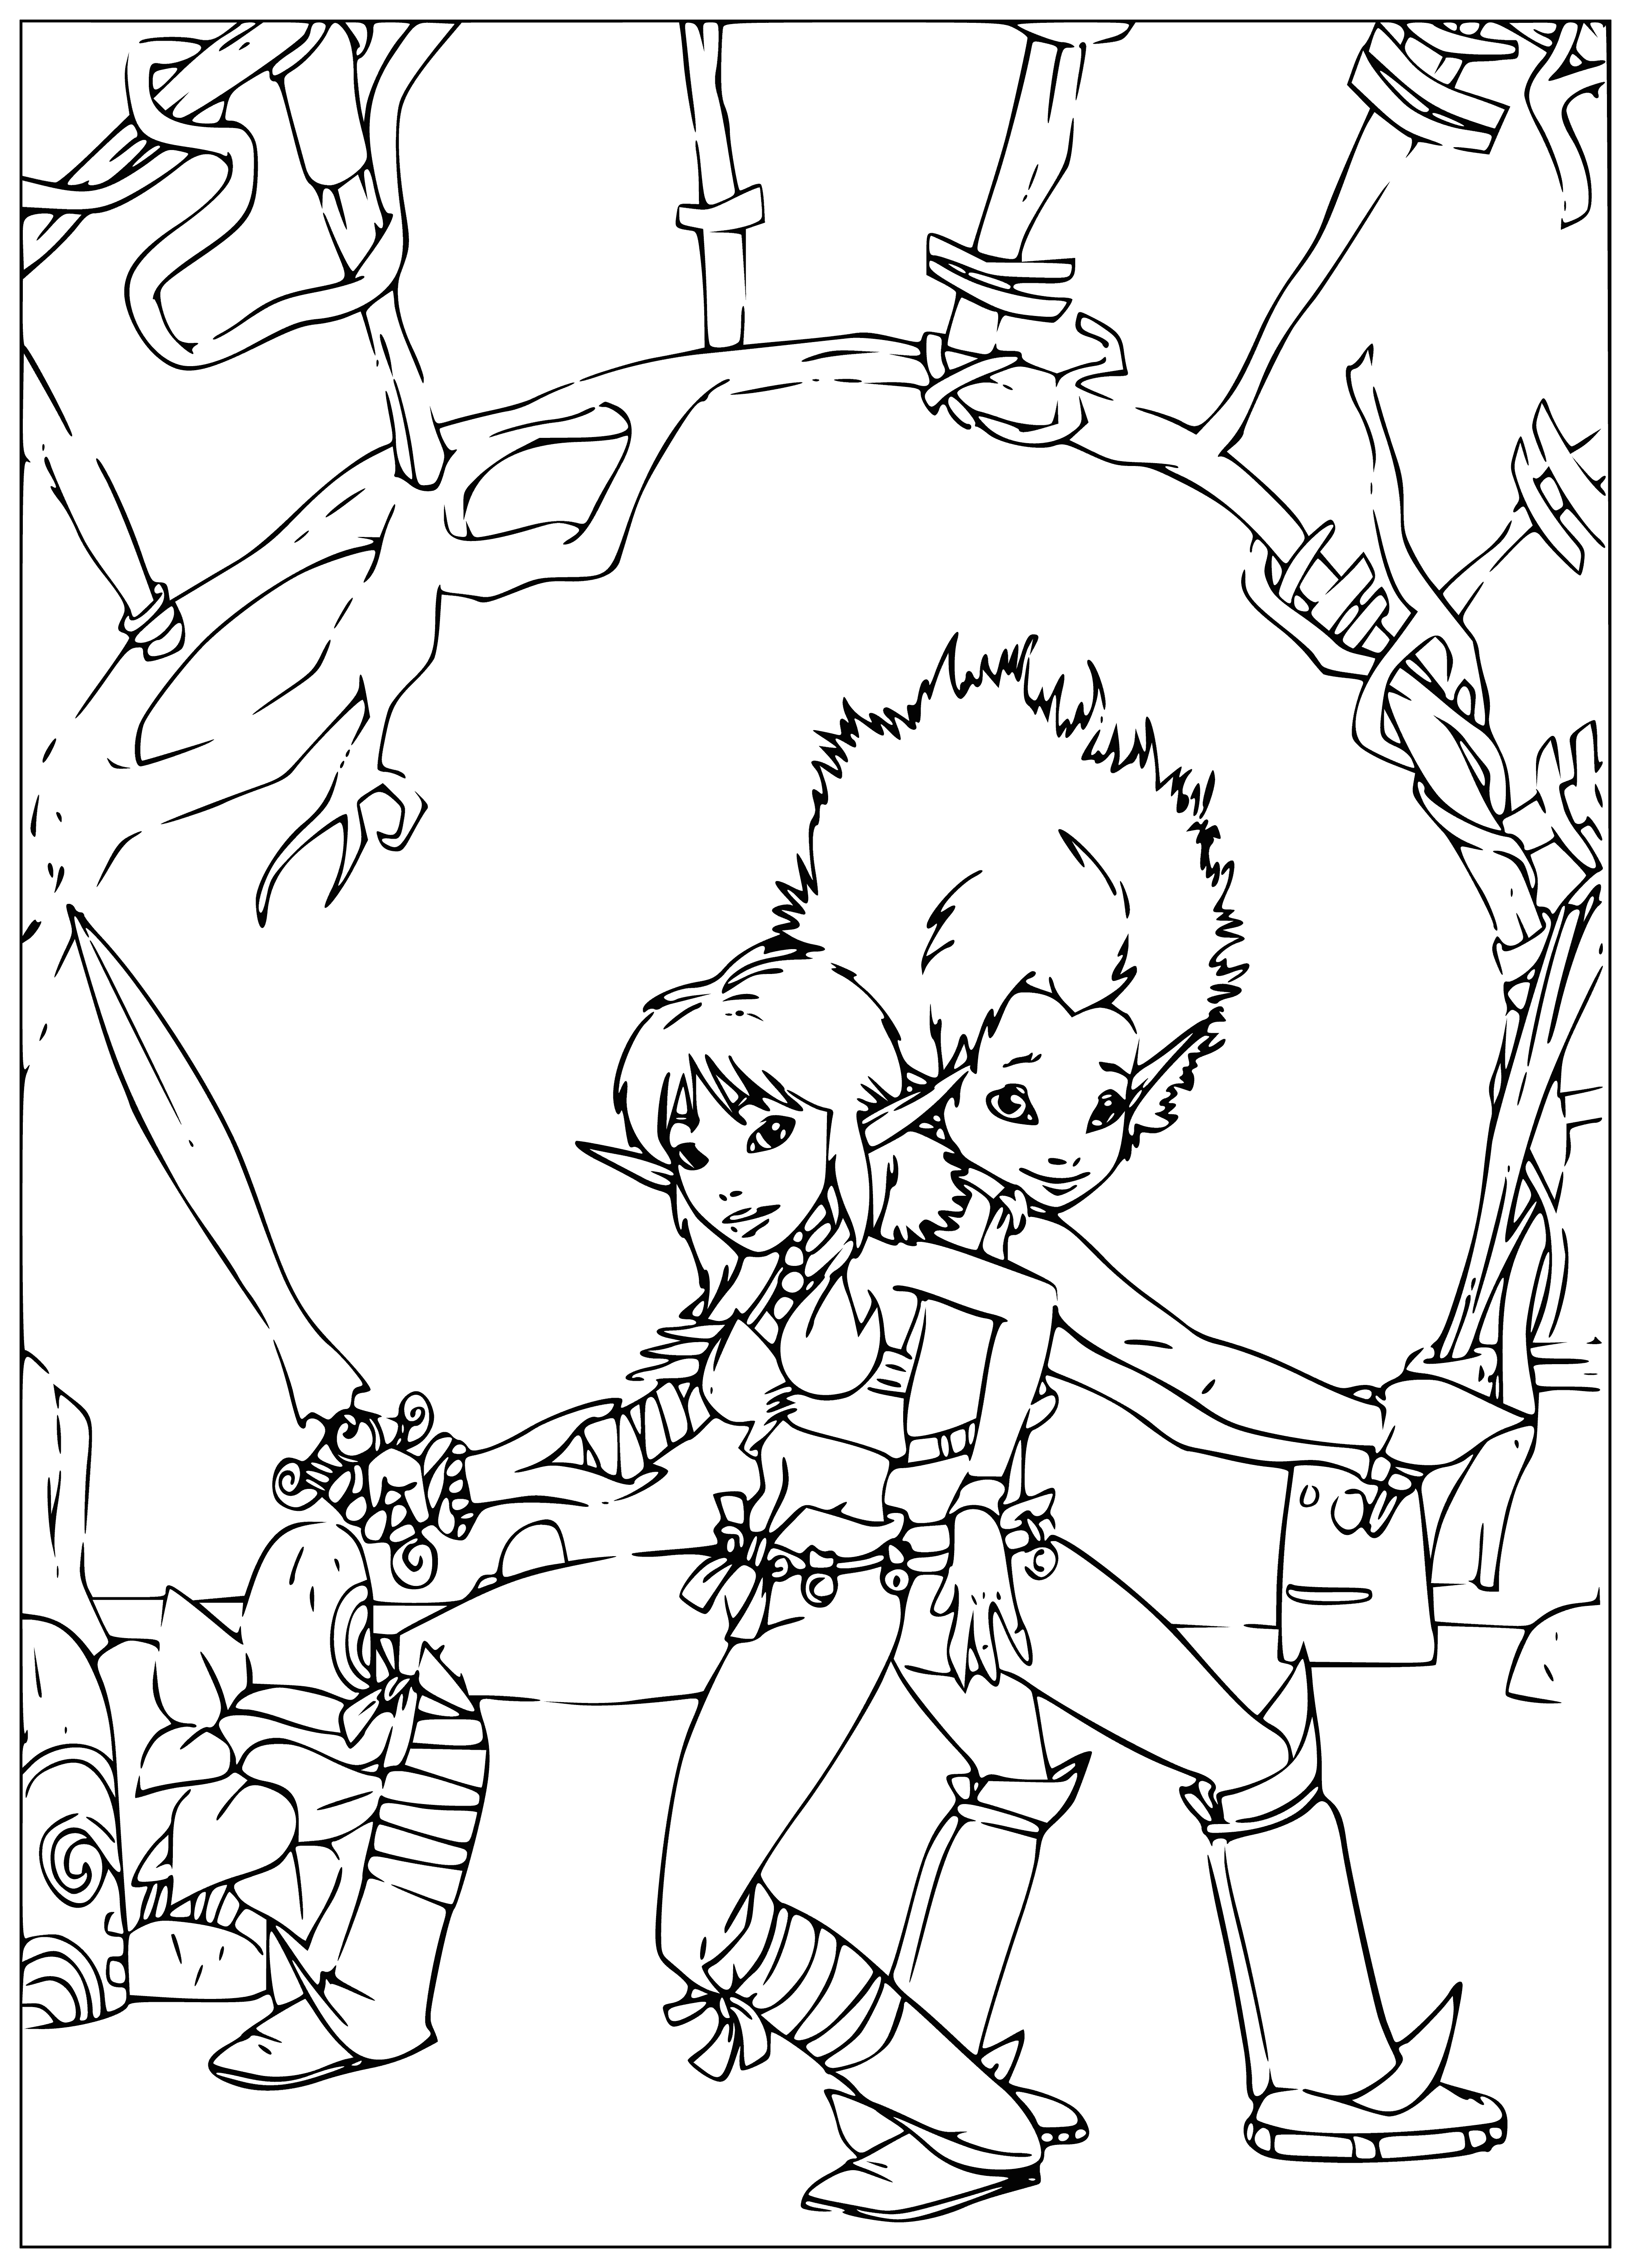 coloring page: Two friends, Selenia & Arthur, stand together. She wears blue w/ white collar. He wears white shirt, blue jeans, brown shoes & holds a plant. #friendship